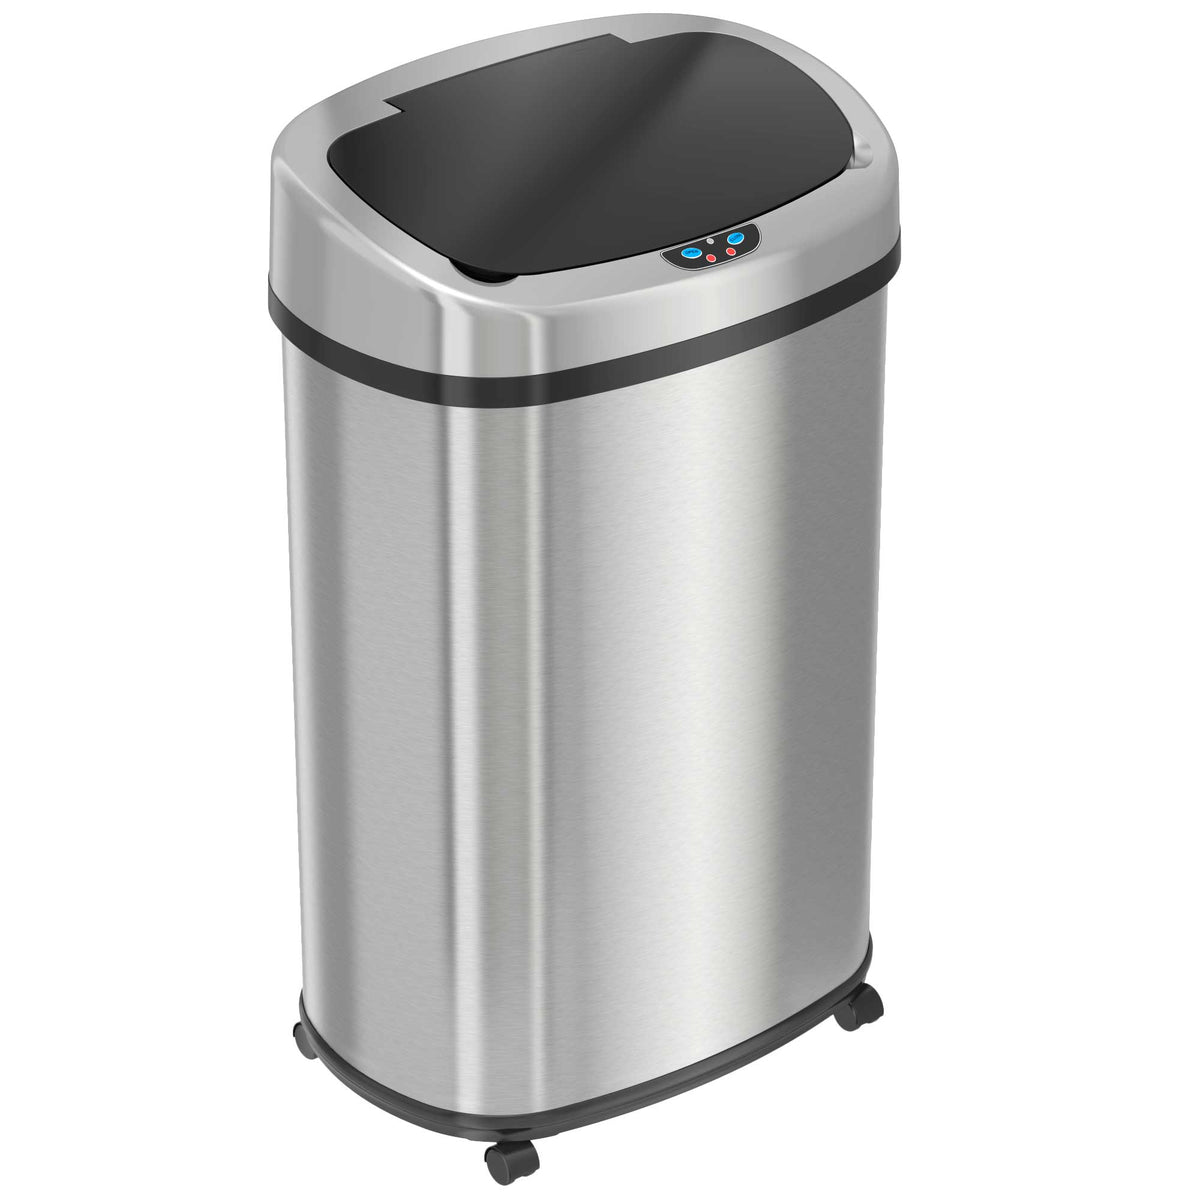 iTouchless 13 Gallon Stainless Steel Rolling Sensor Trash Can with Wheels and Odor Filter